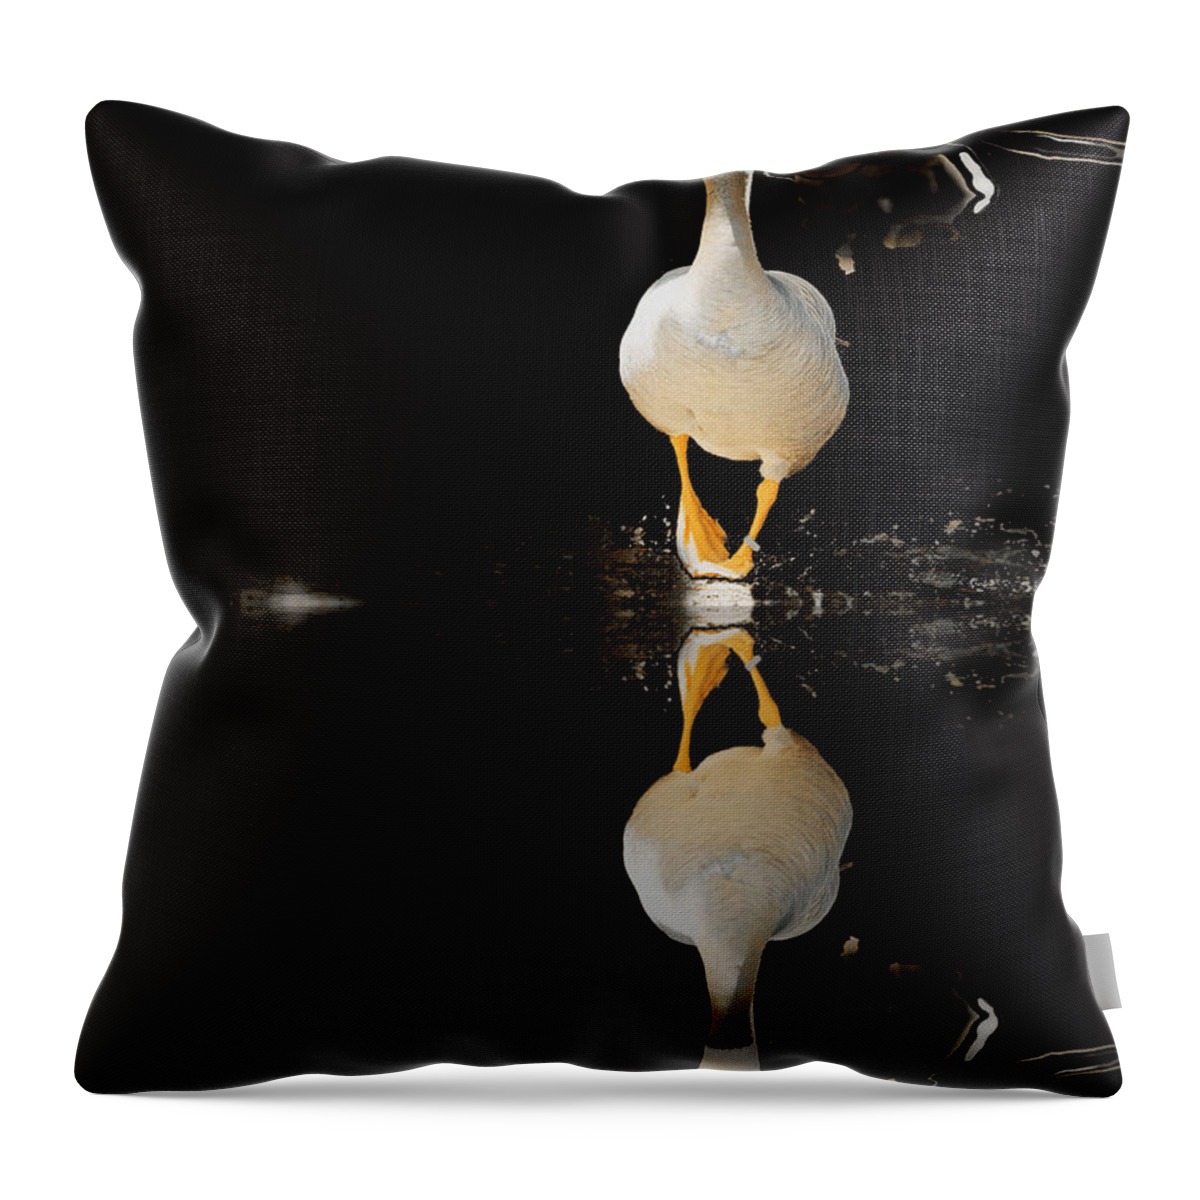 Duck Throw Pillow featuring the photograph Duck On Stage by Christine Sponchia